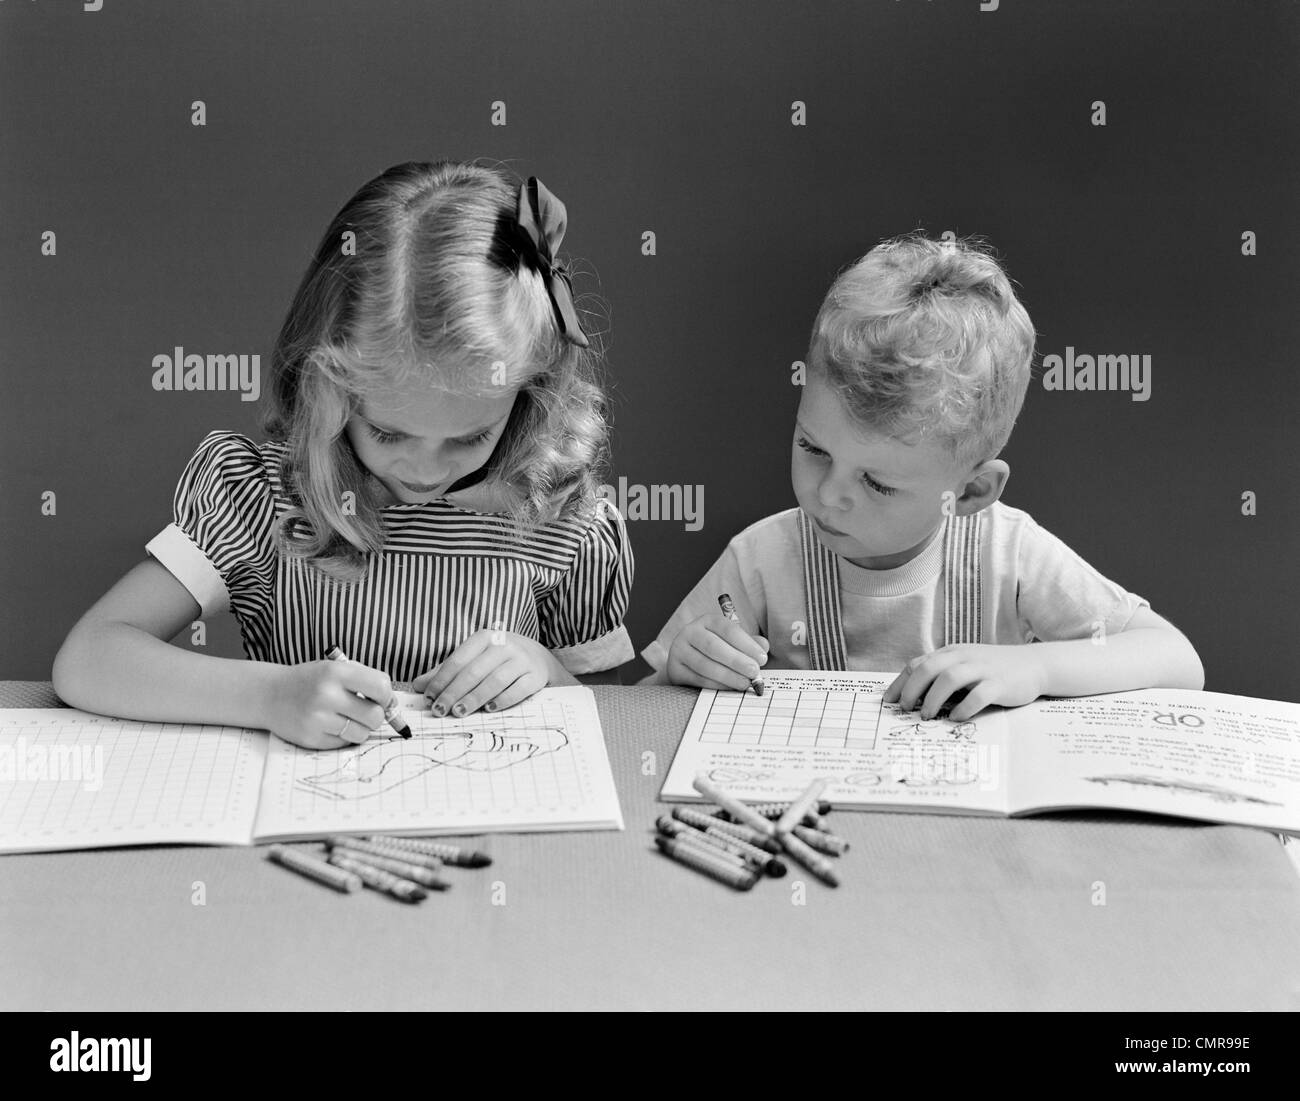 1940s TWO CHILDREN COLORING DRAWING IN BOOK Stock Photo